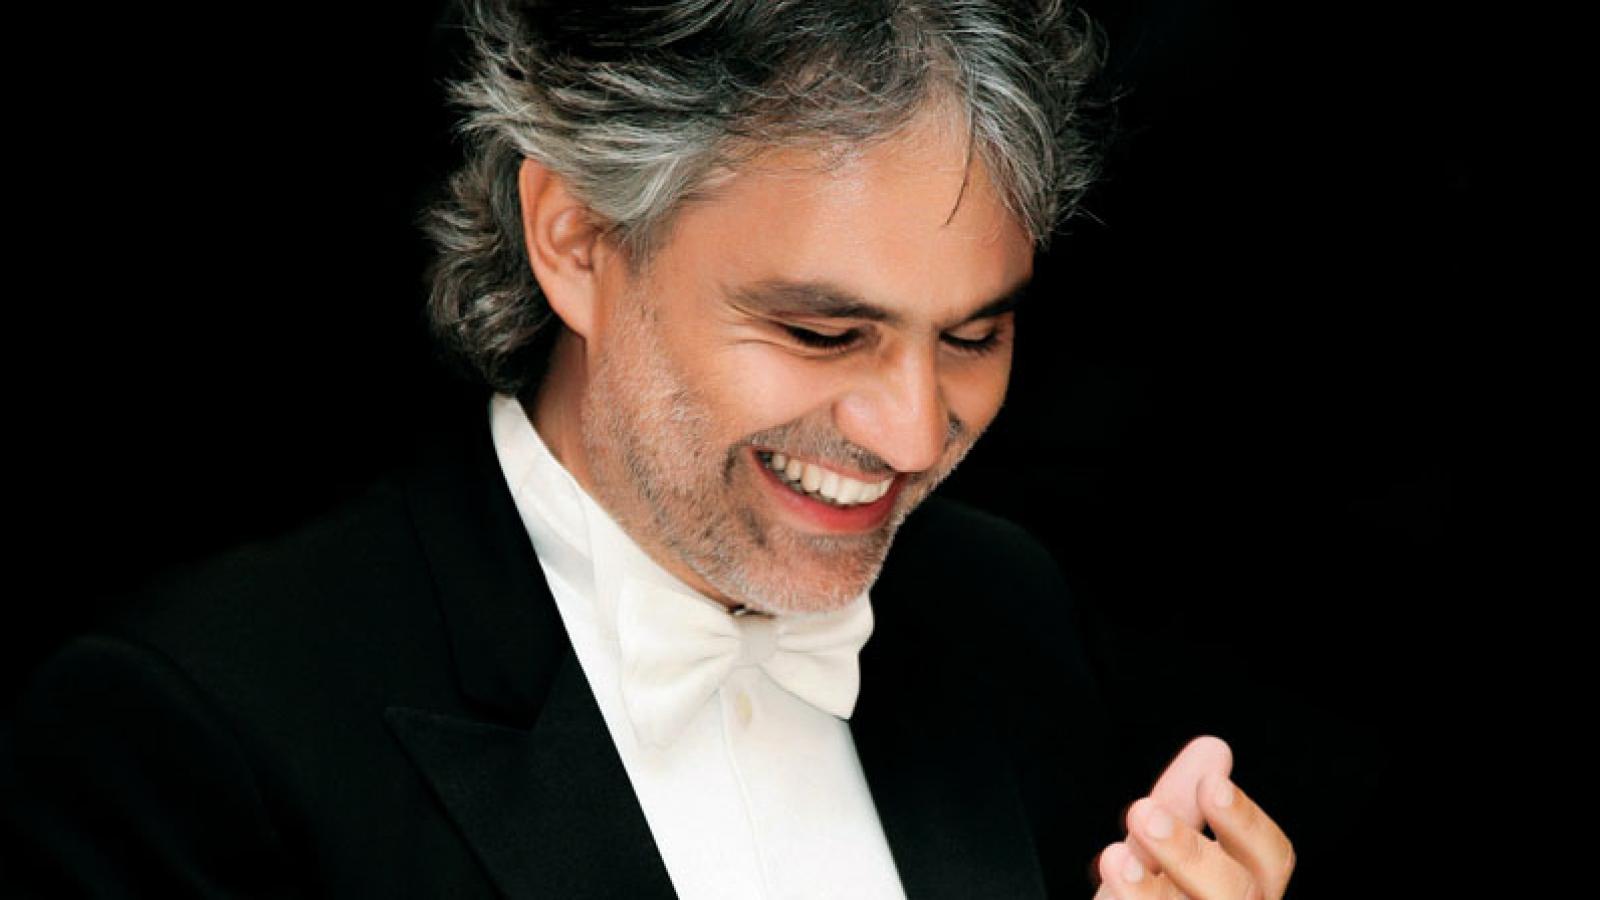 Andrea Bocelli in Concert at the Allstate Arena WTTW Chicago